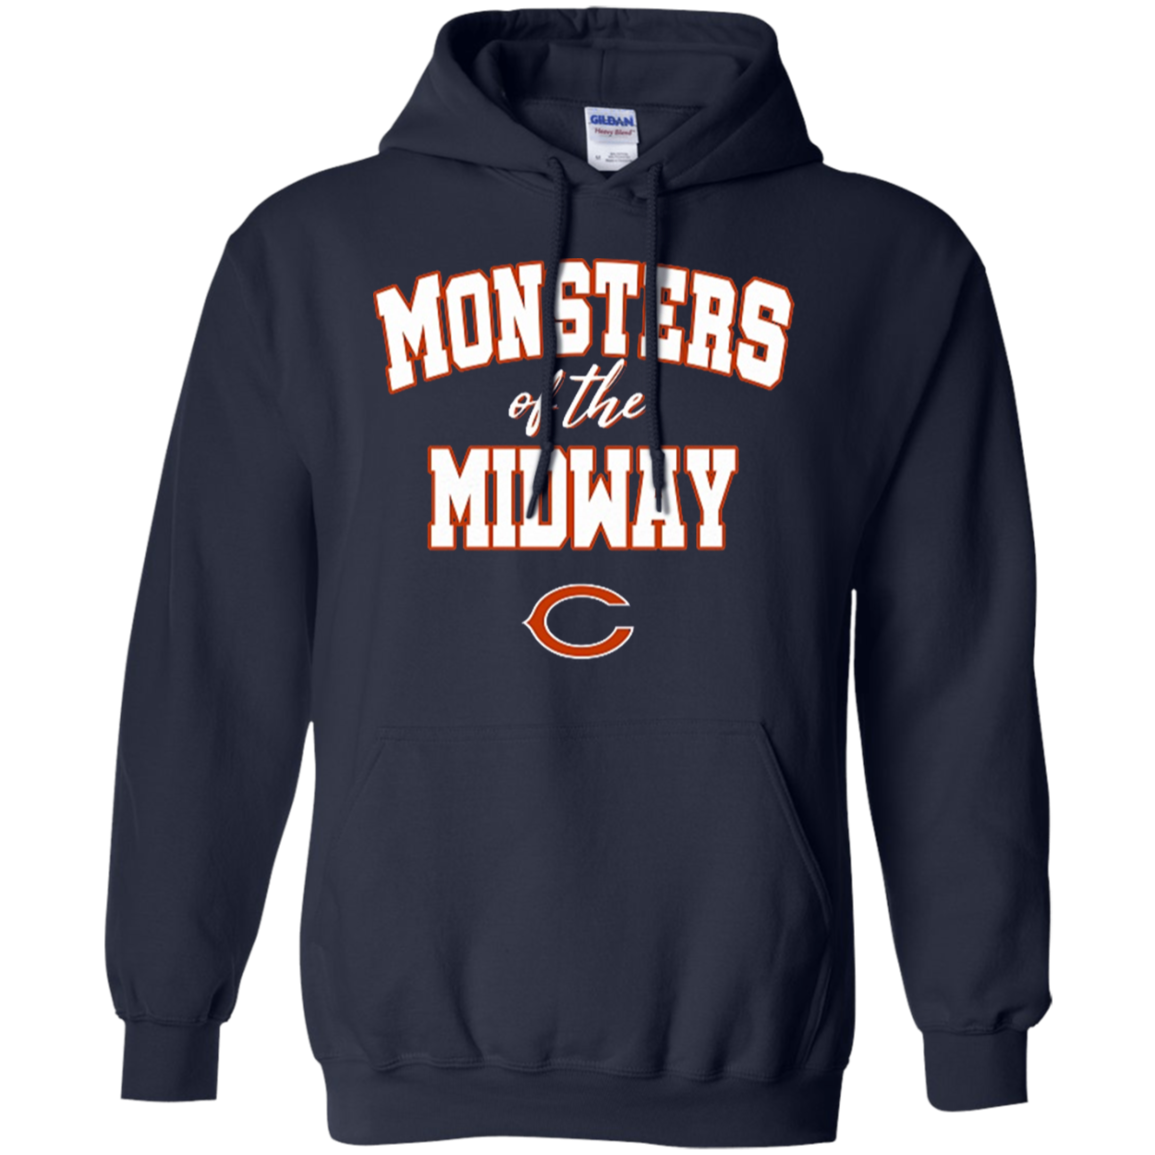 monsters of the midway hoodie nike